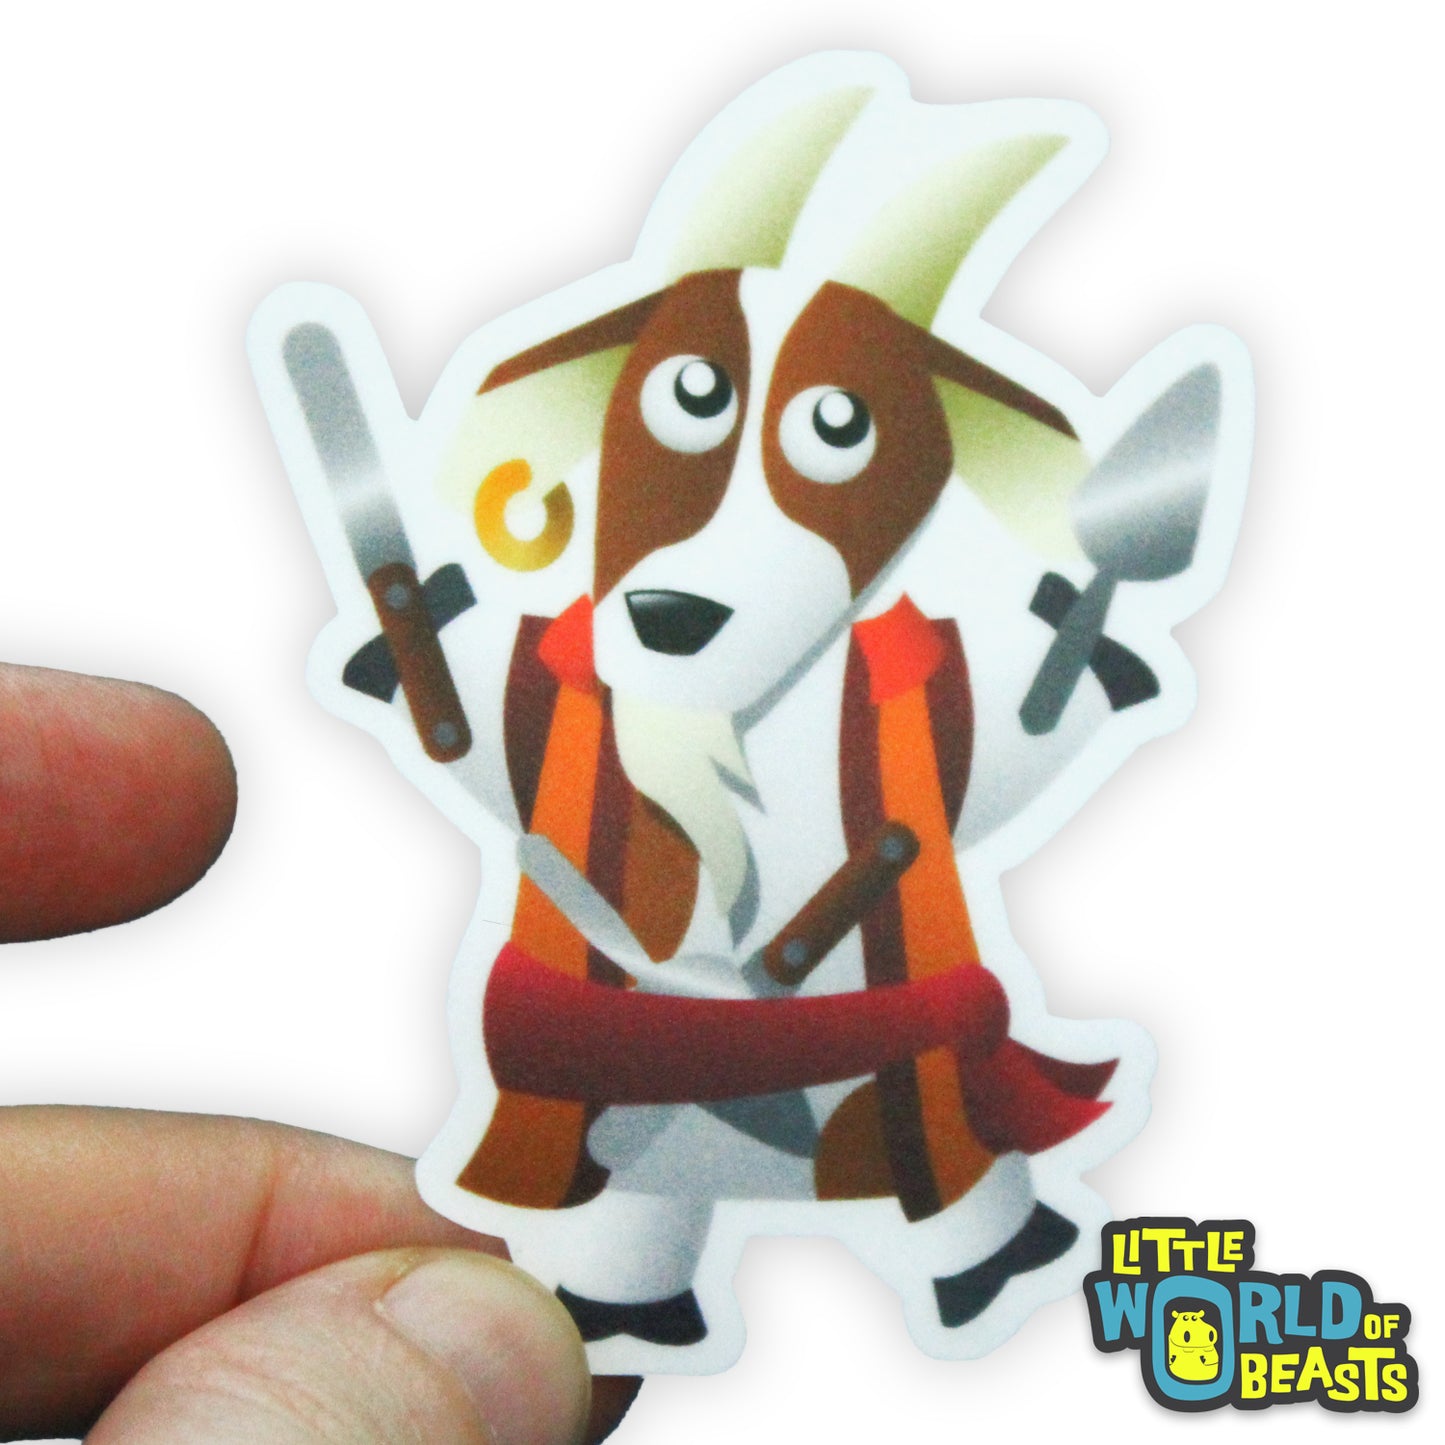 Goat with Pastry Knives Vinyl Sticker